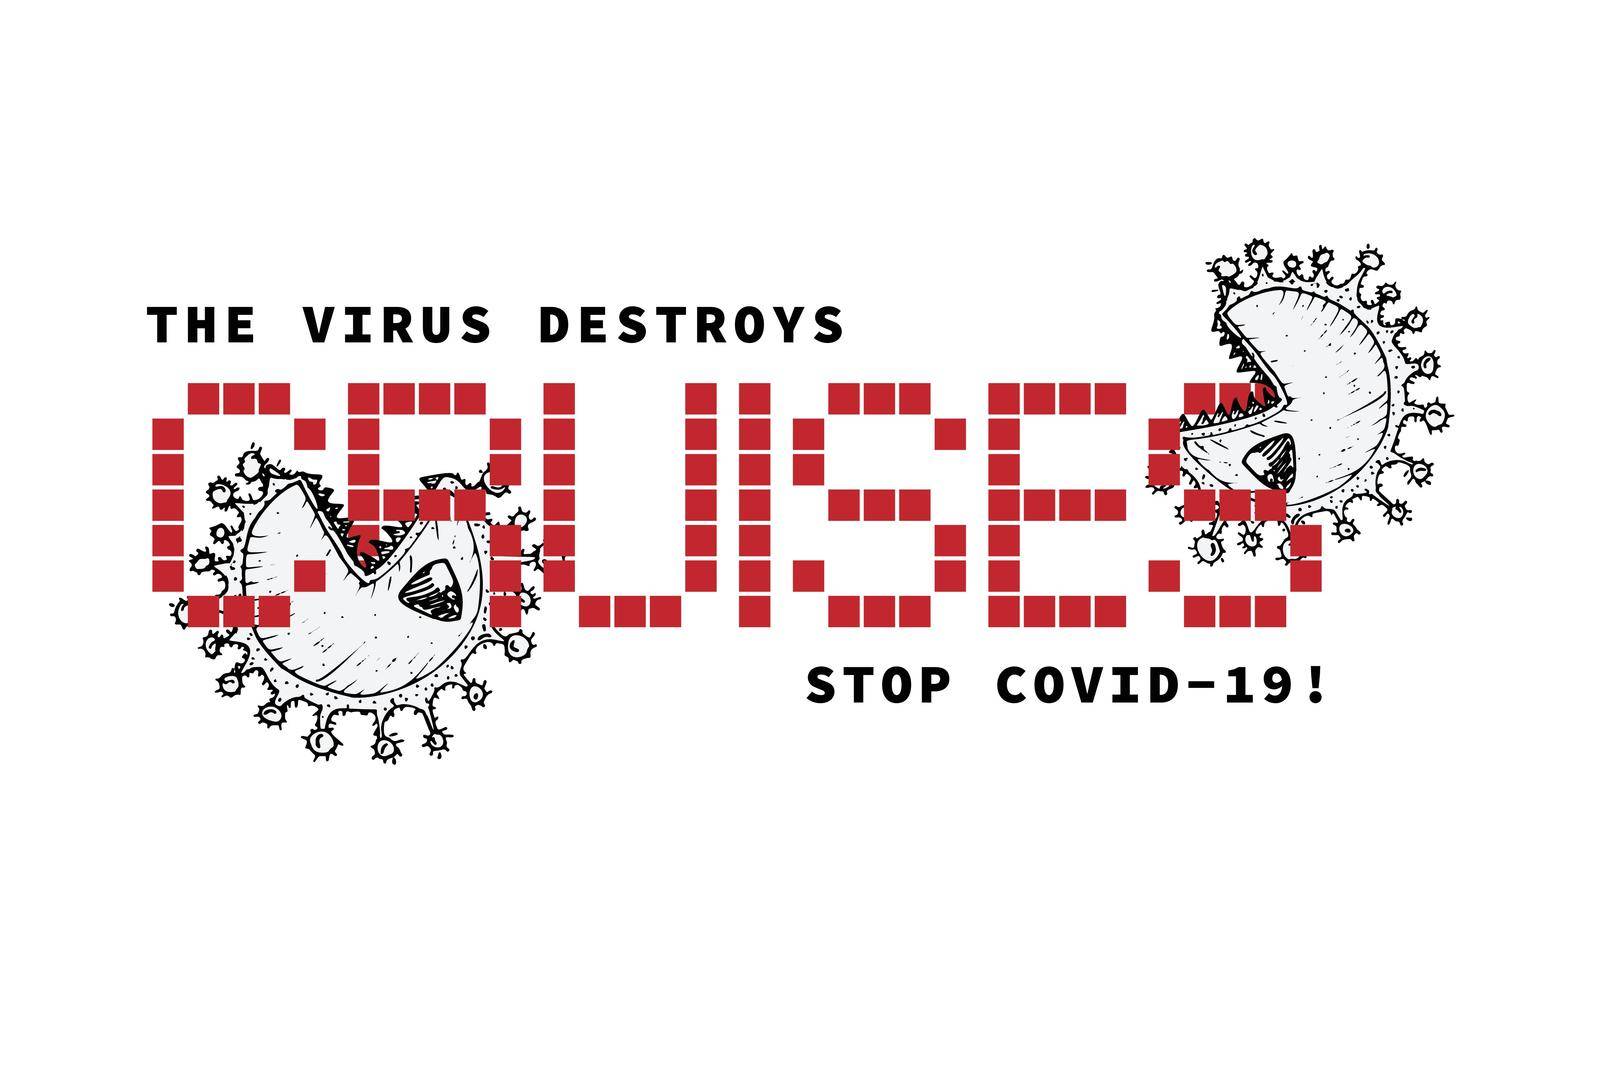 Design concept of Medical, social, economic and financial information agitational poster against coronavirus epidemic with text The virus destroys cruises. Stop Covid 19 by zimages